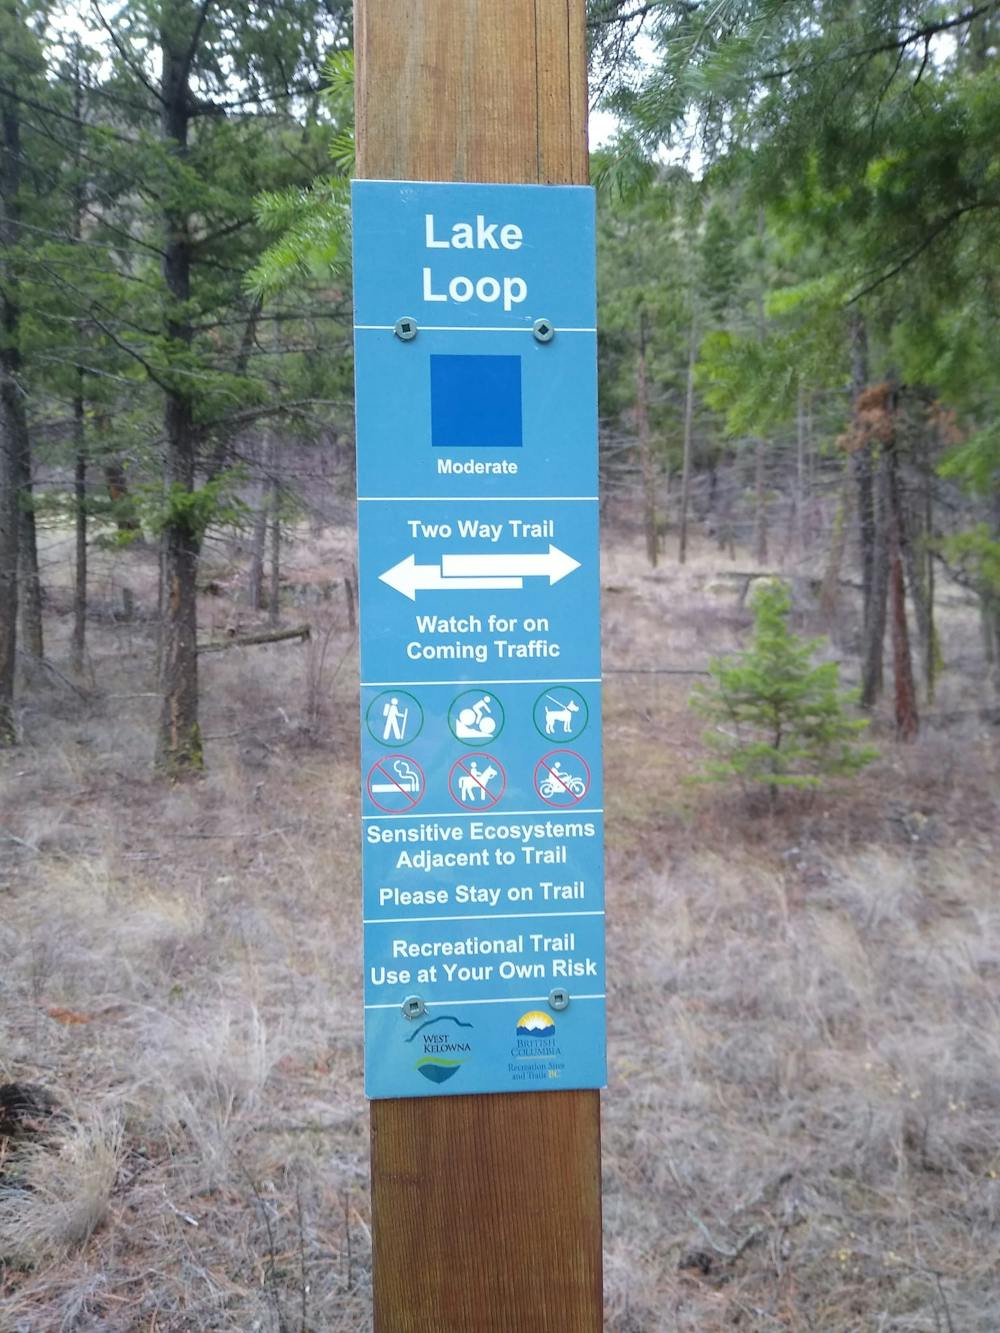 Once you reach the lake, you won't get lost!